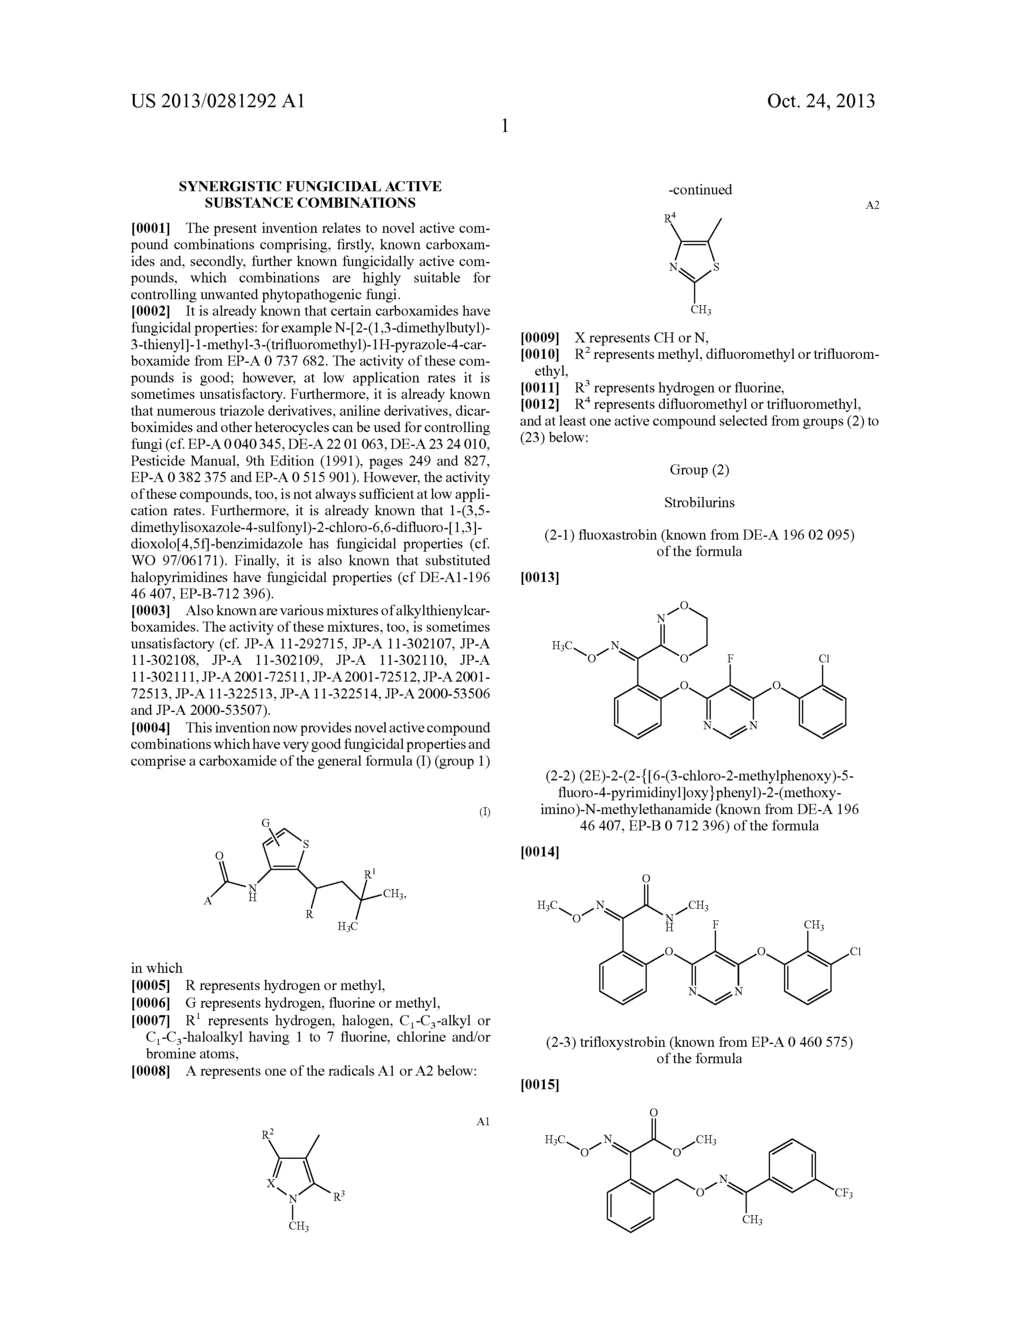 Synergistic Fungicidal Active Substance Combinations - diagram, schematic, and image 02